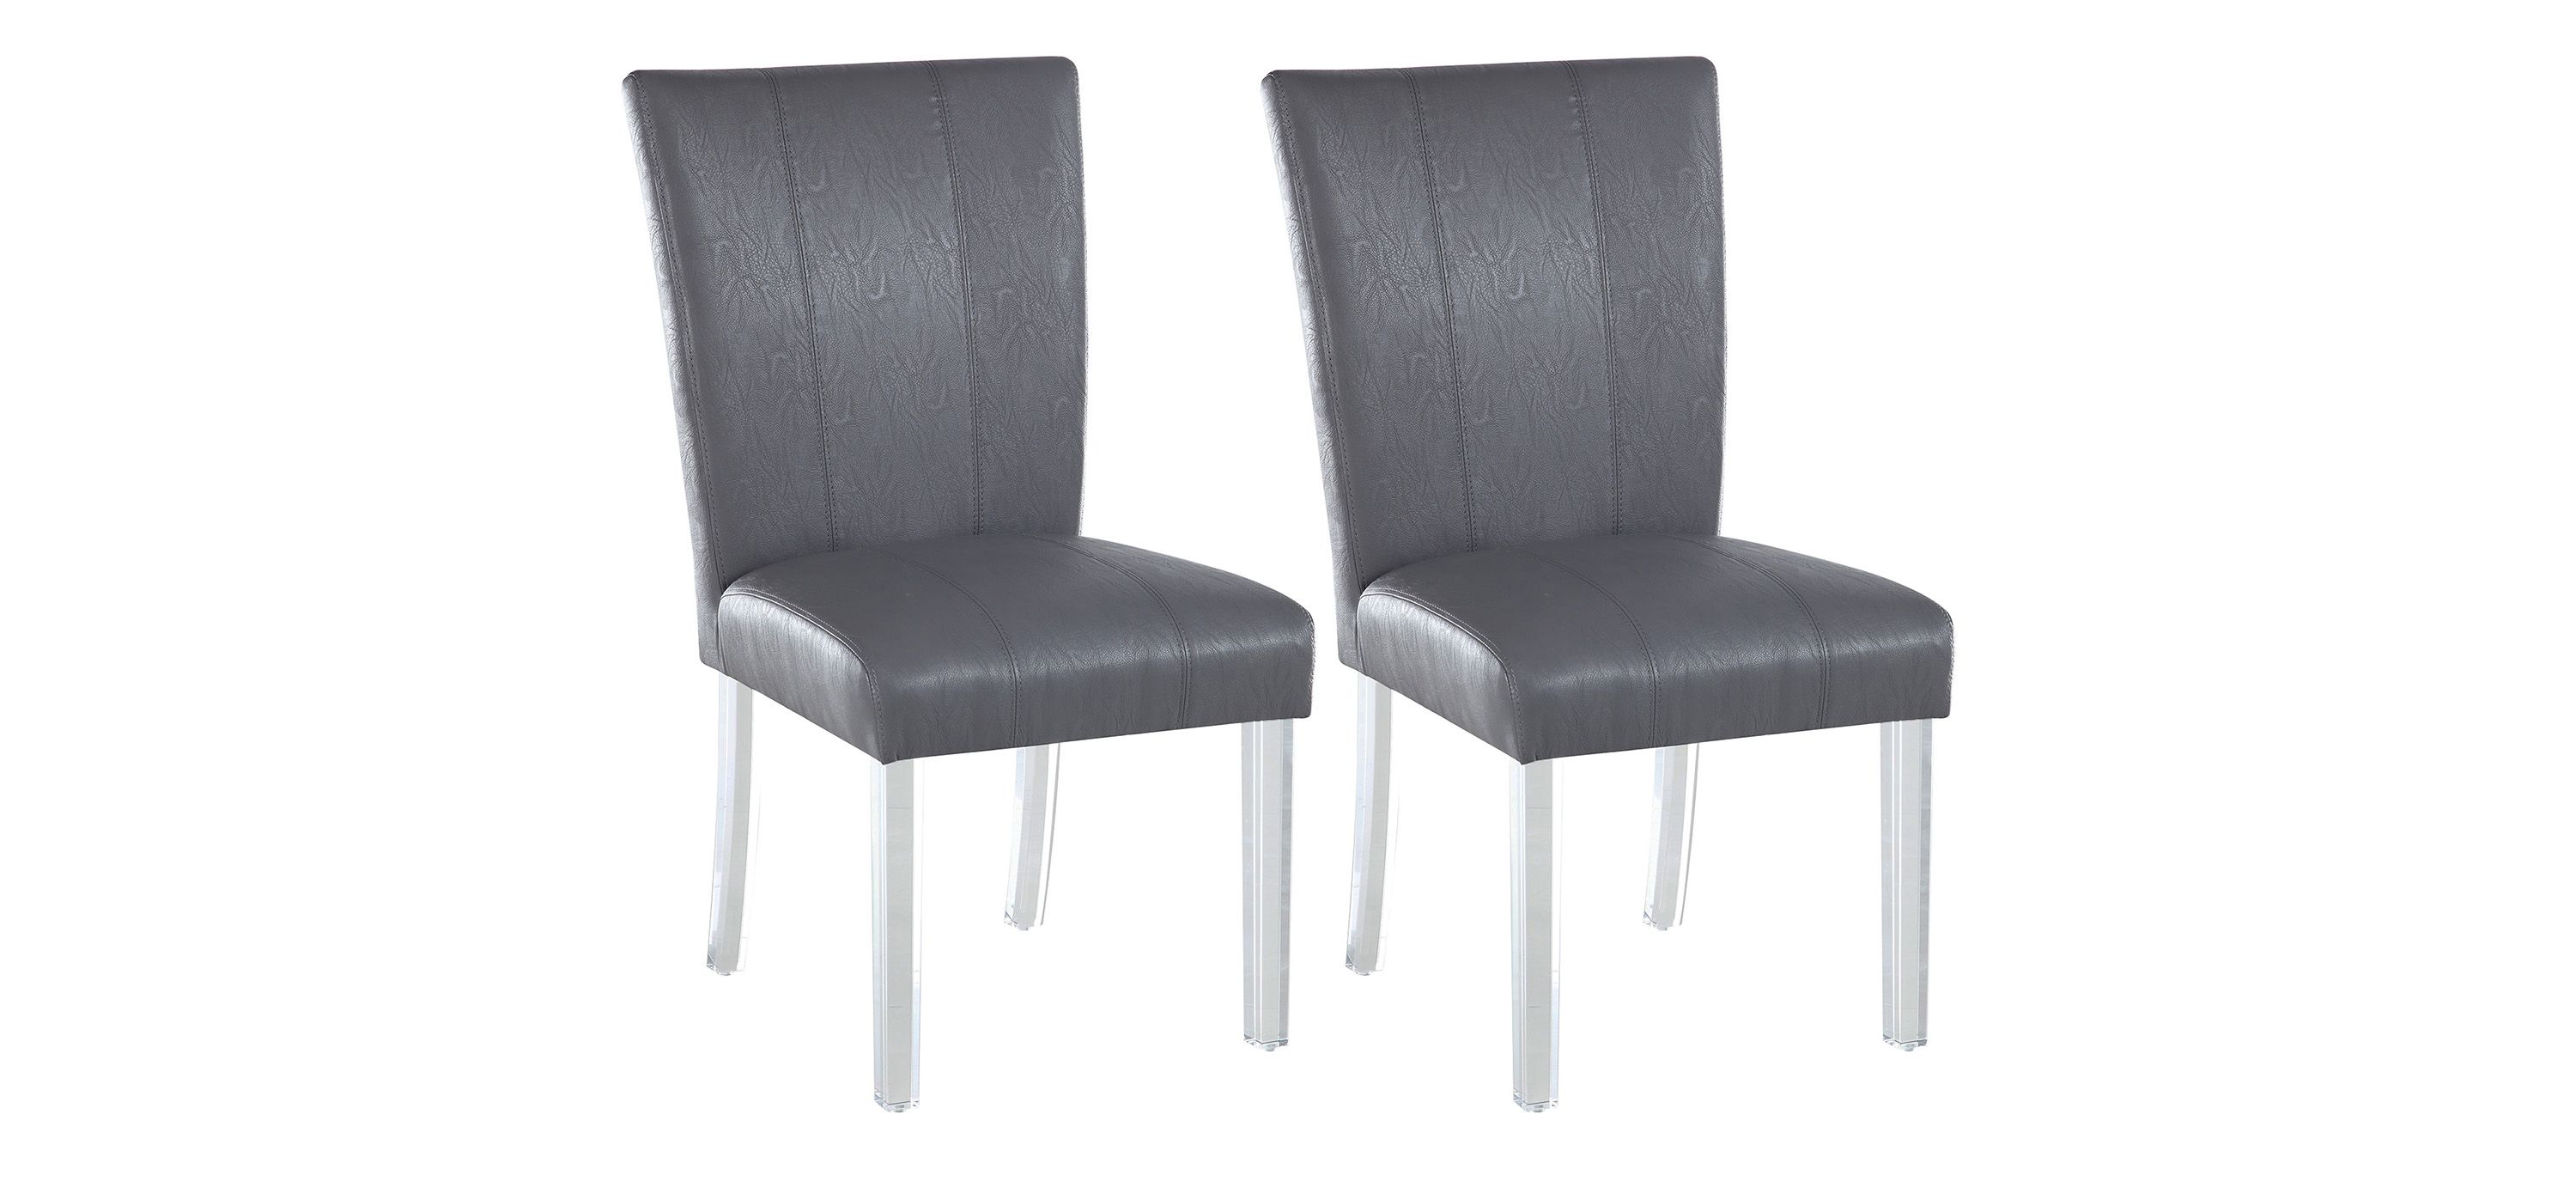 Roberts Side Chair - Set of 2